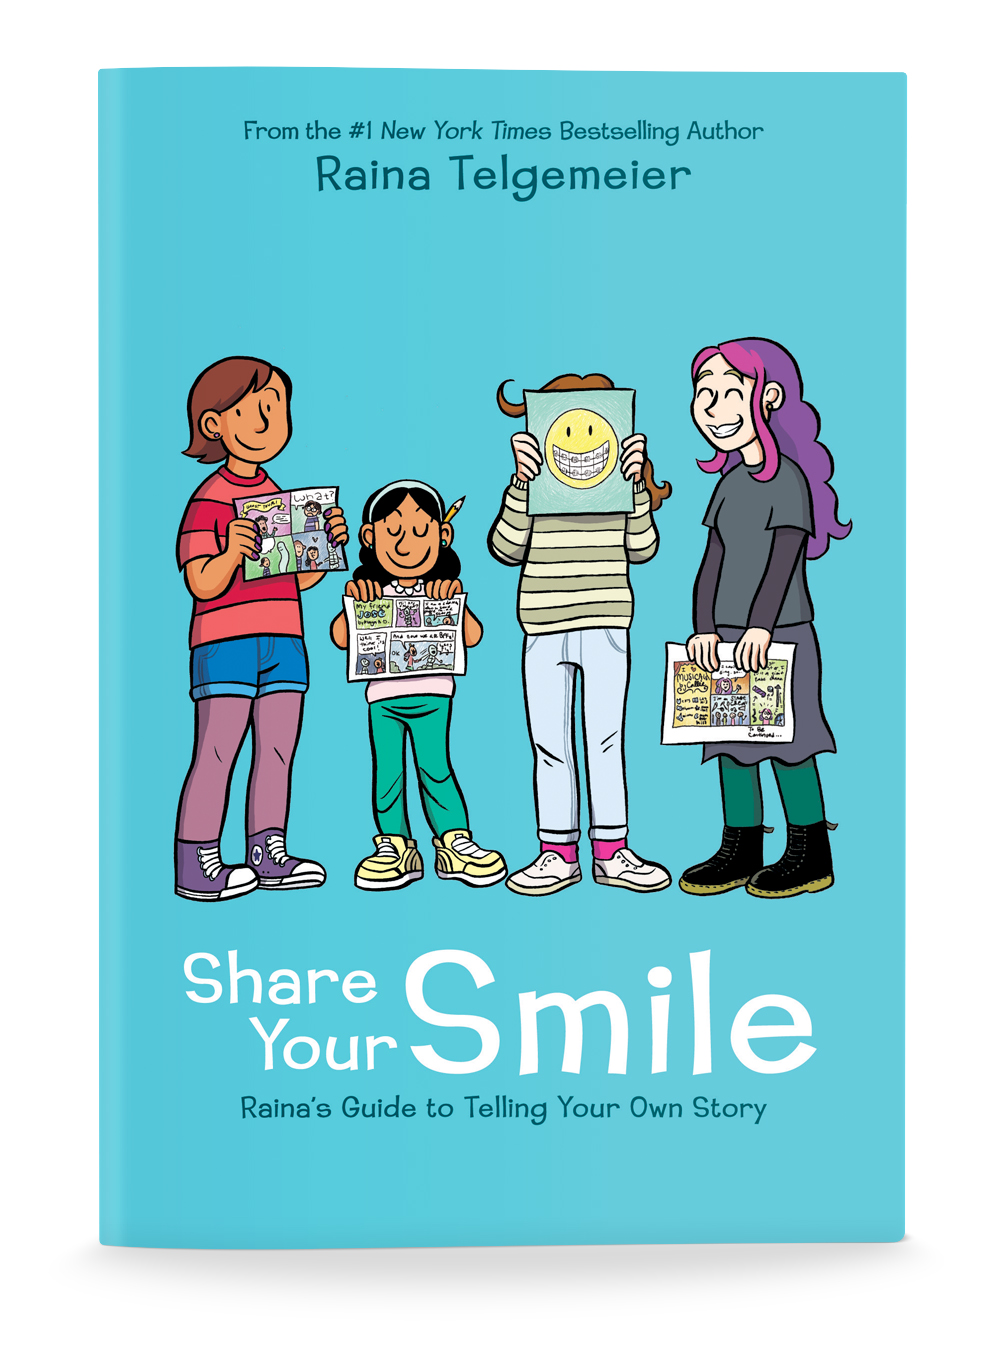 Copy of Share Your Smile